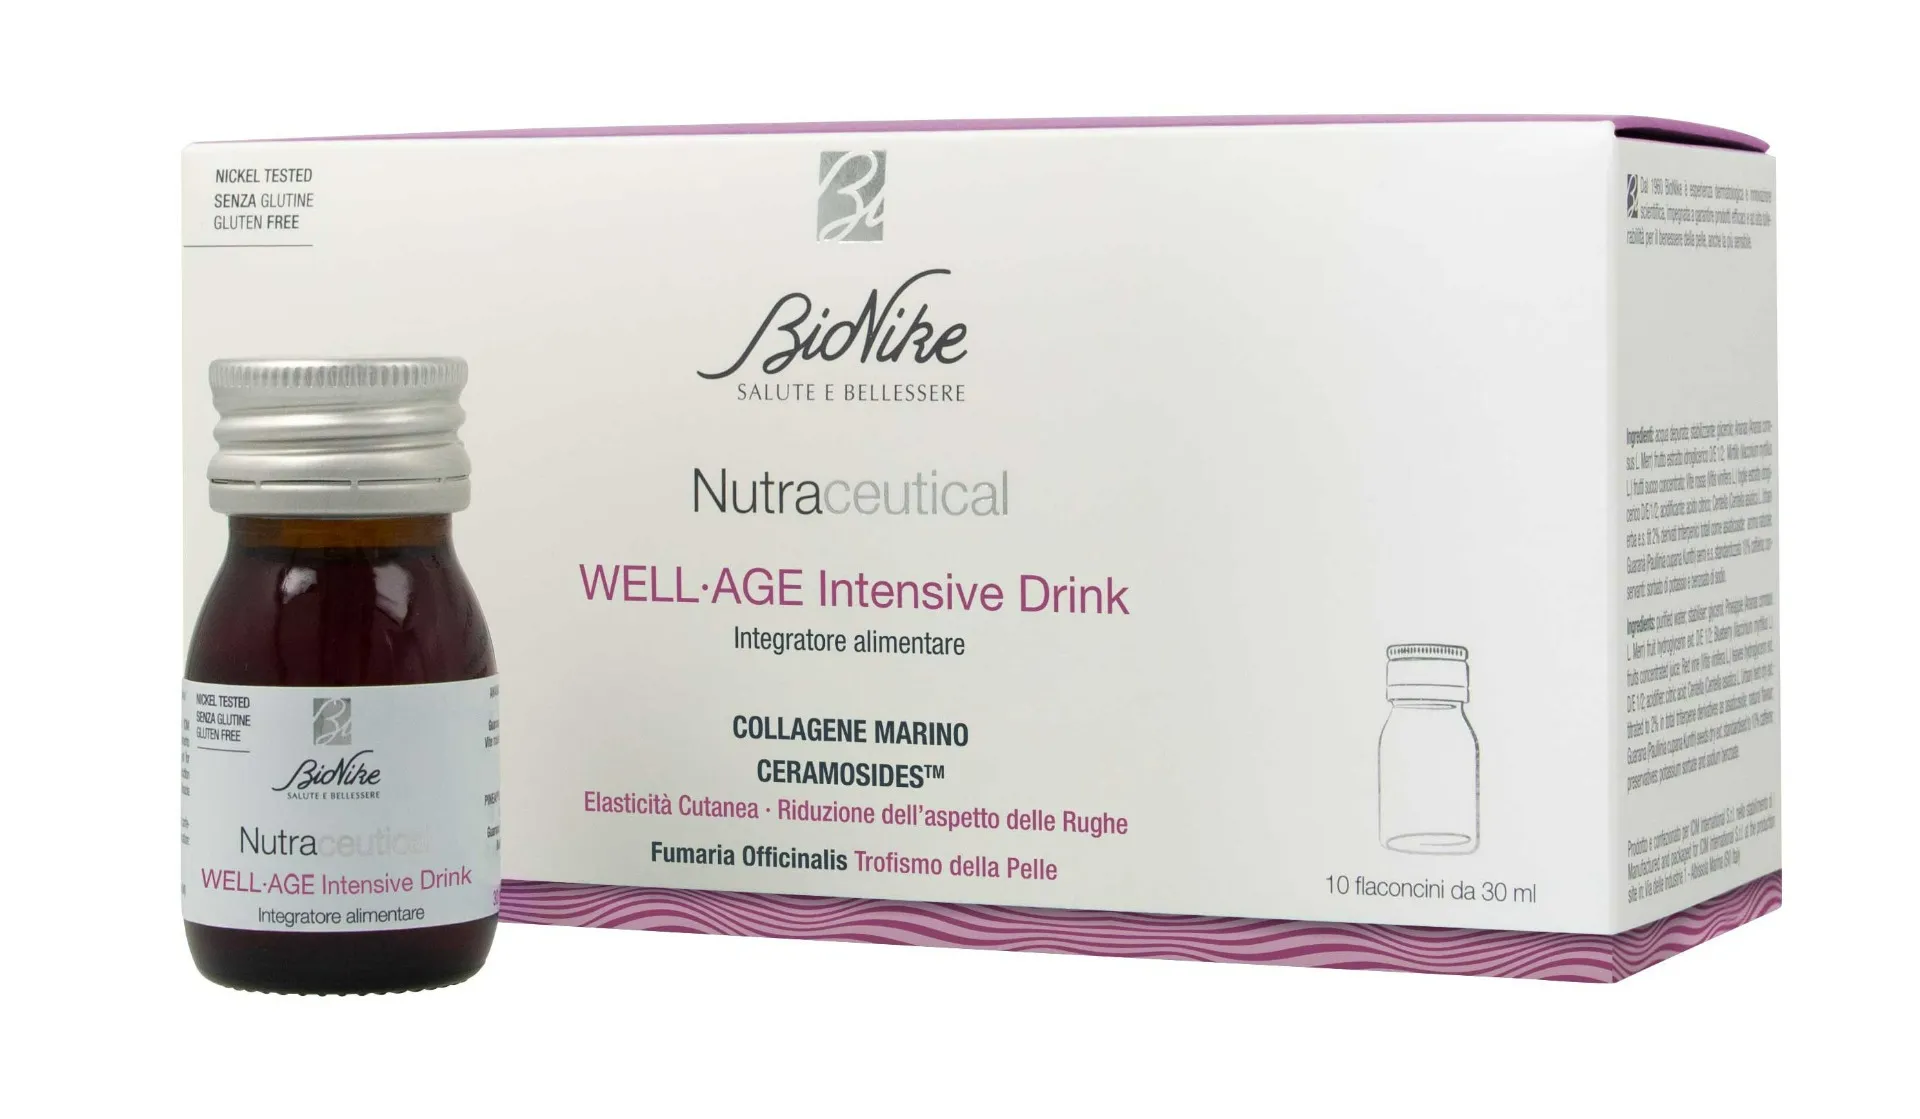 BIONIKE NUTRACEUTICAL WELL AGE INTENSIVE DRINK 10 FLACONCINI